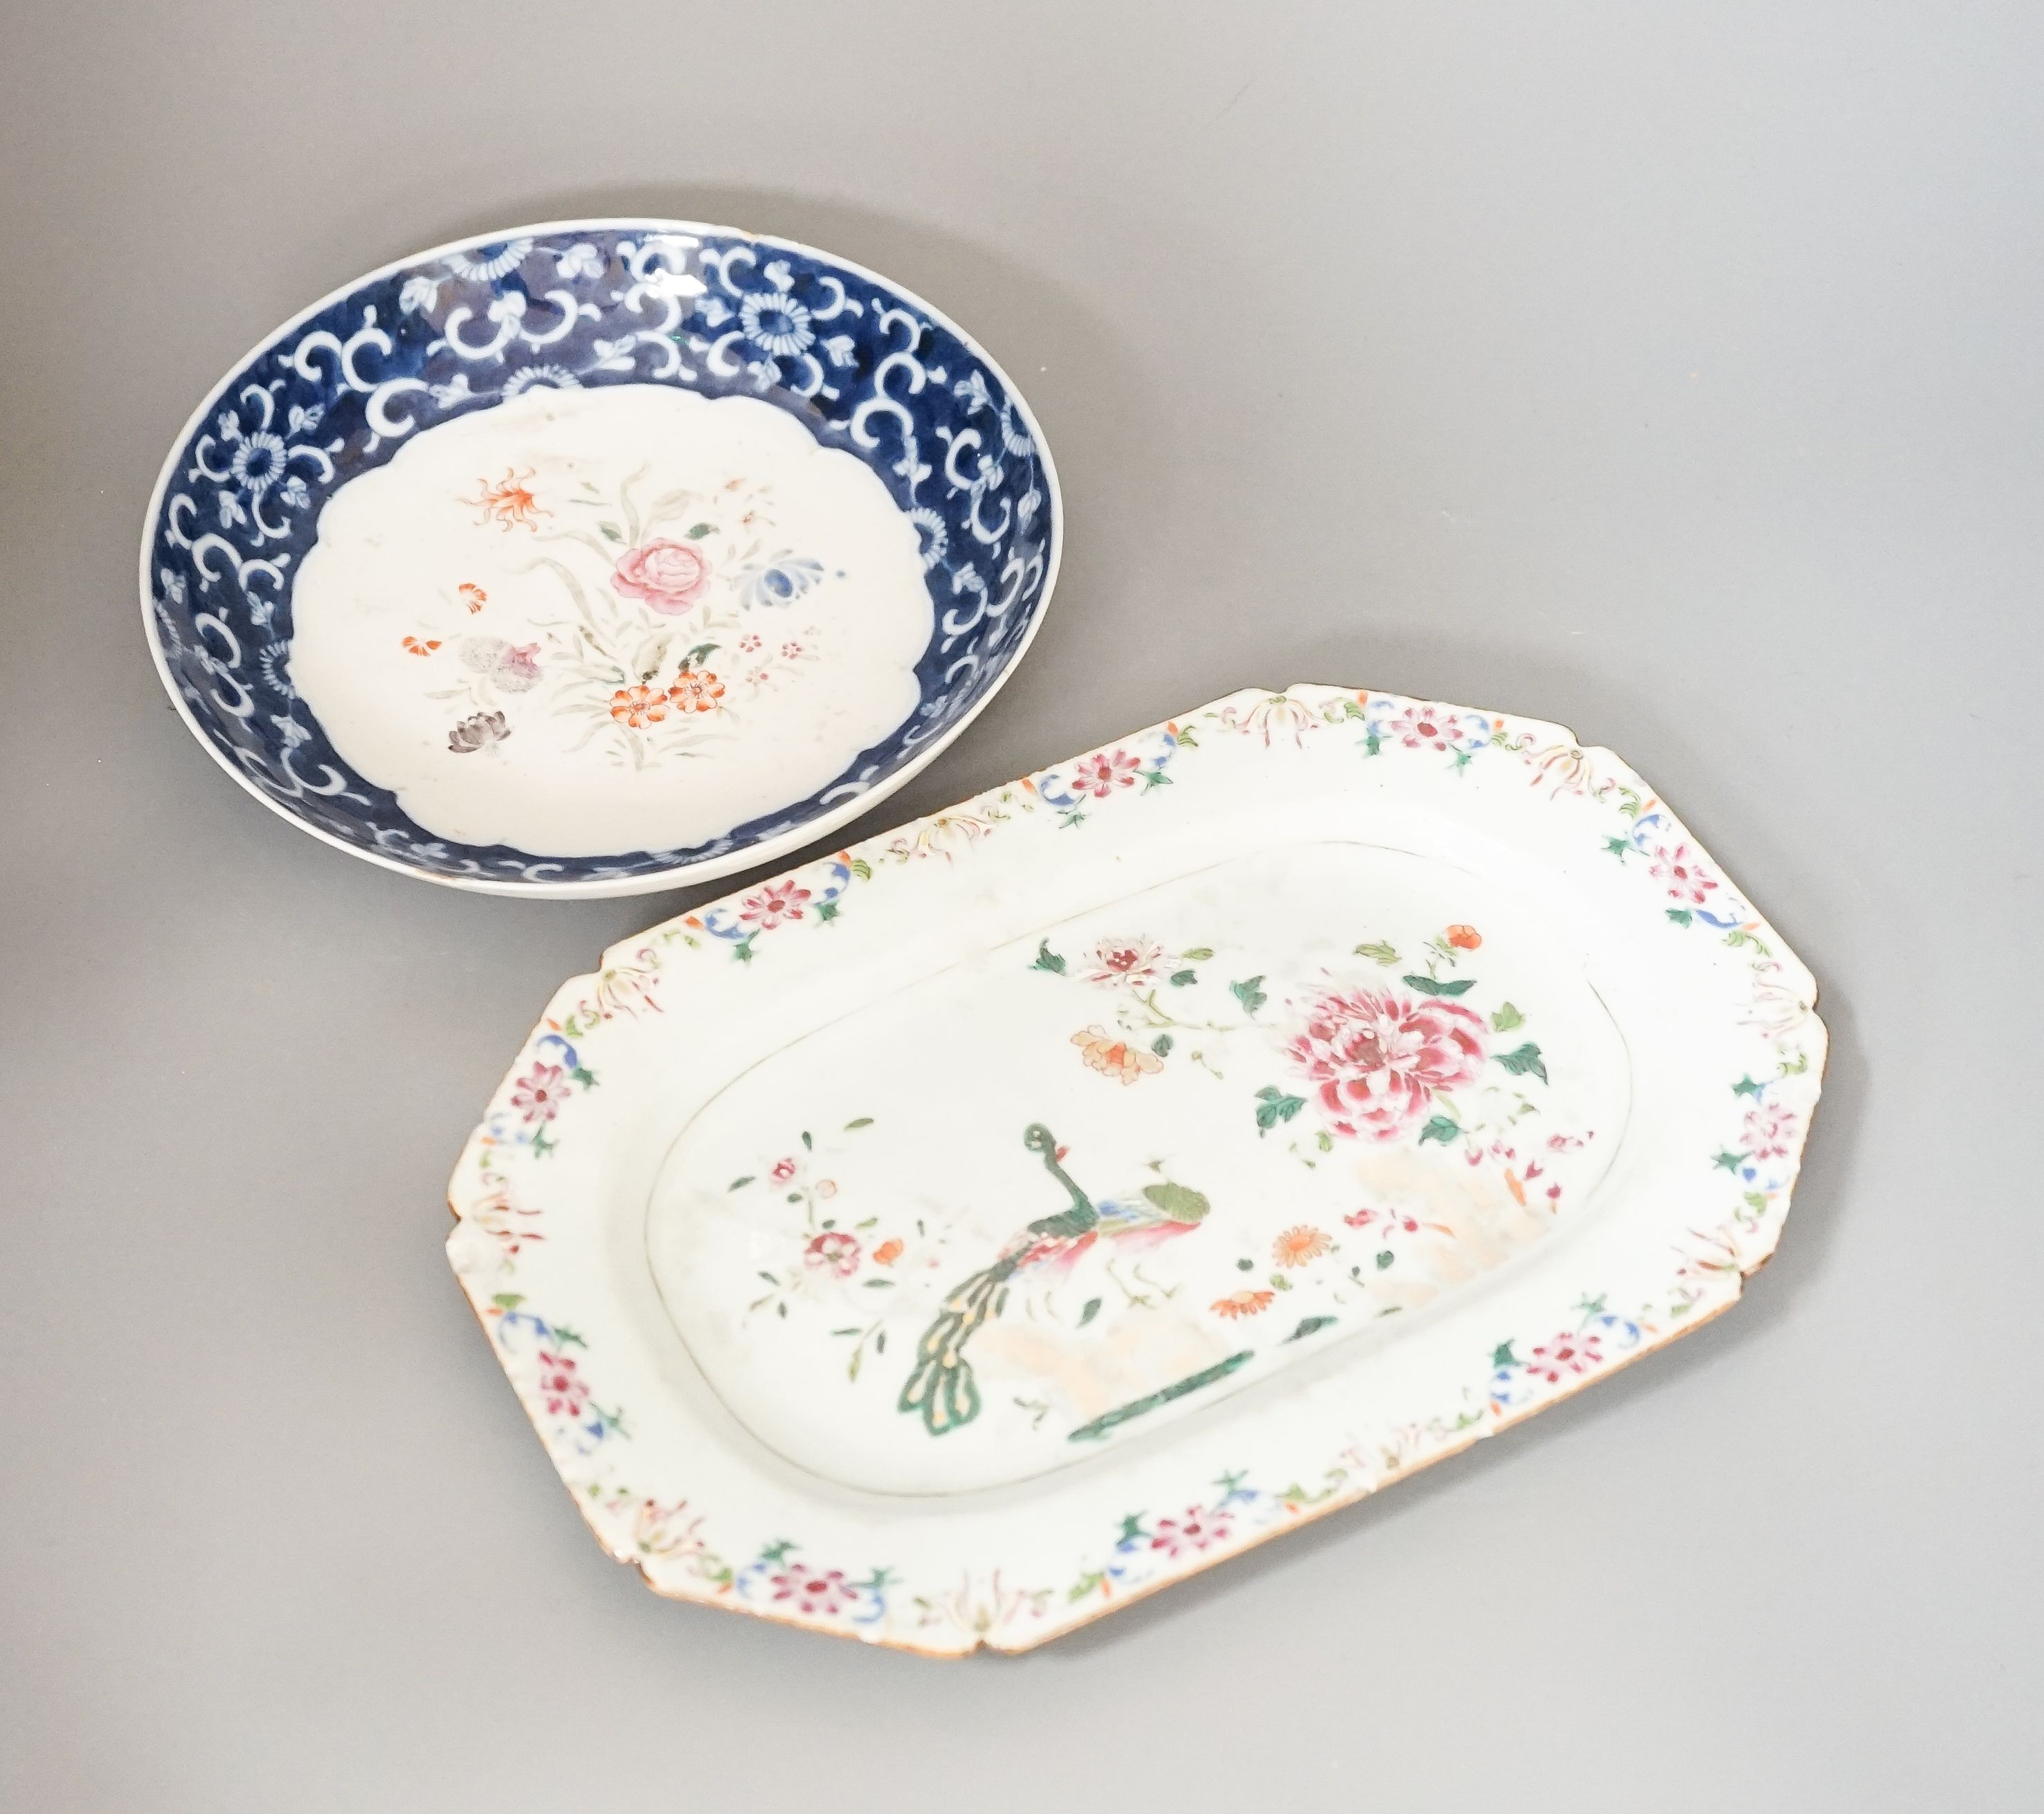 A Chinese famille rose double peacock dish, Qianlong, 28 cm and a Chinese famille rose and underglaze blue saucer dish, Jiaqing